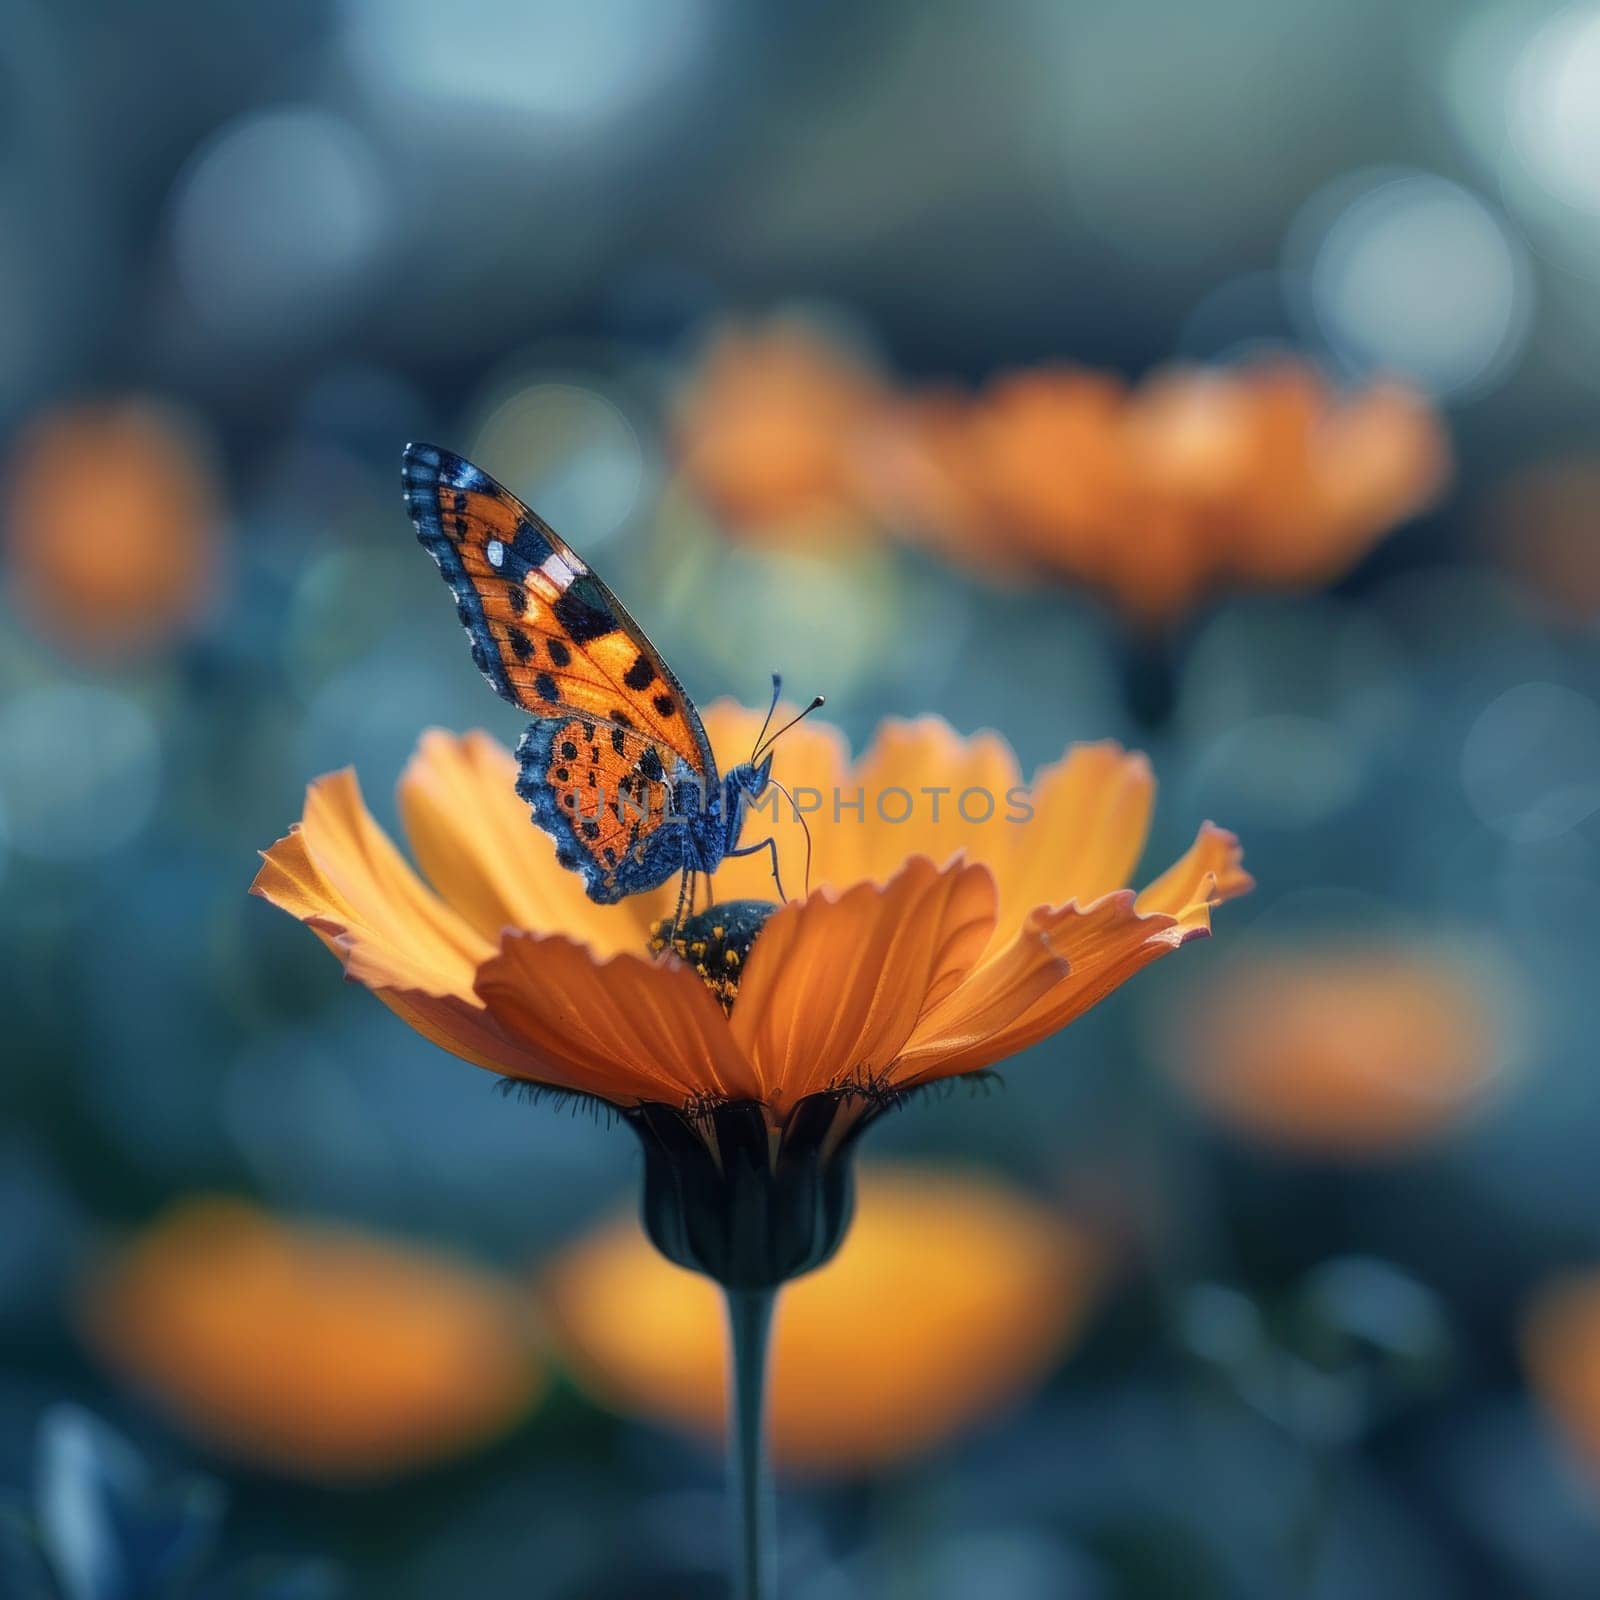 A vibrant butterfly elegantly perches on a bright yellow flower, casting a beautiful and peaceful scene.